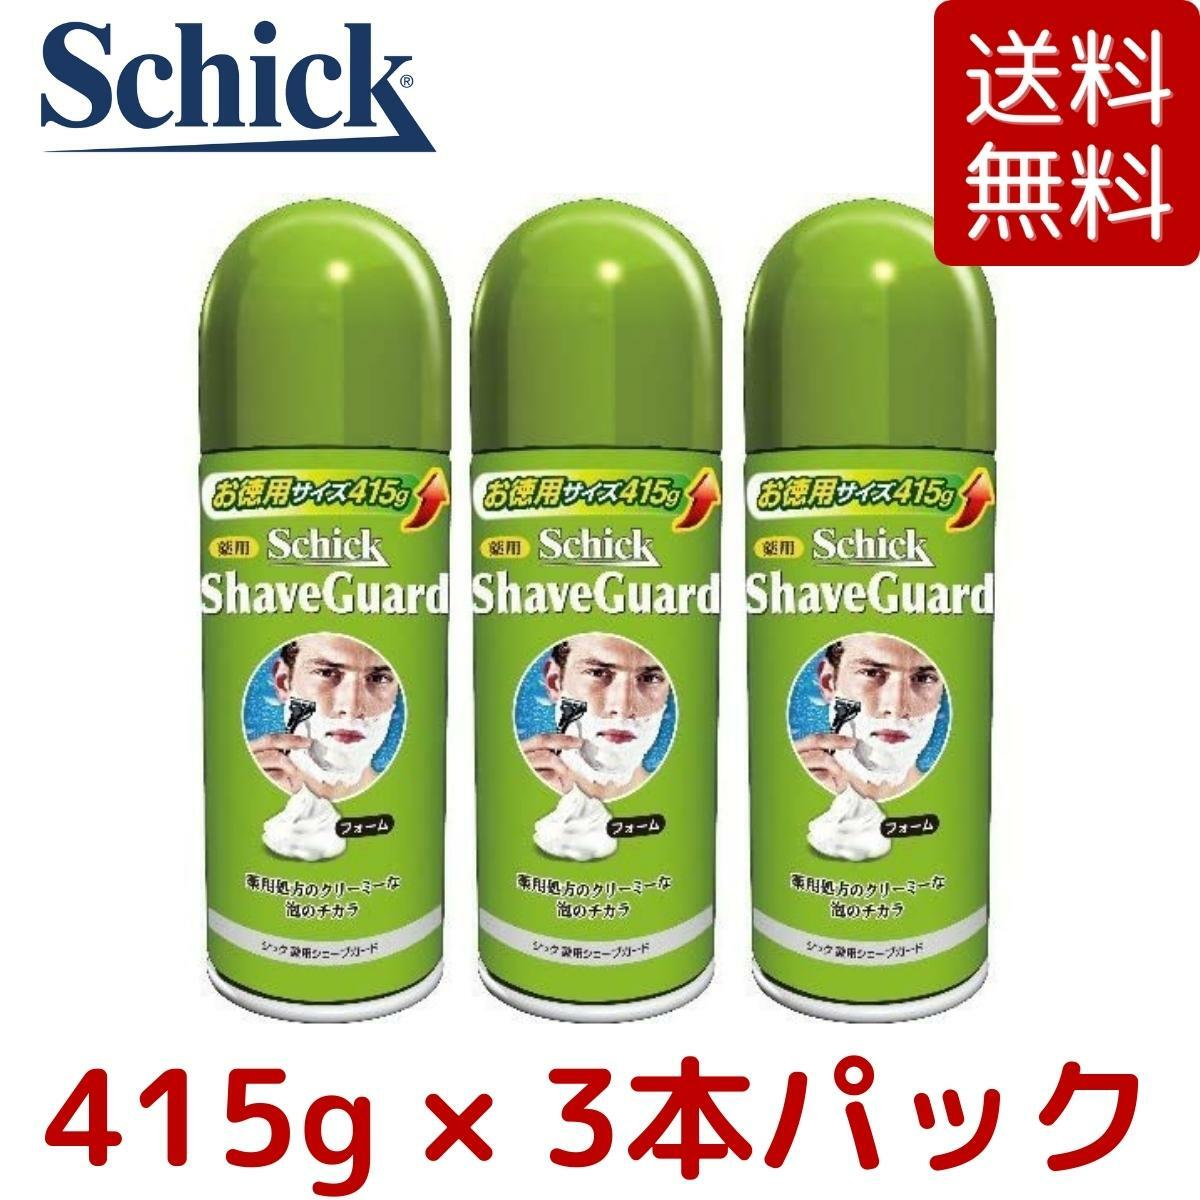    Schick VbN p VF[uK[h pTCY 415g ~ 3{pbN shave guard Ђ Ђ E E VF[rOtH[ VF[utH[ VF[rO[X RXgR COSTCO yVqɏo